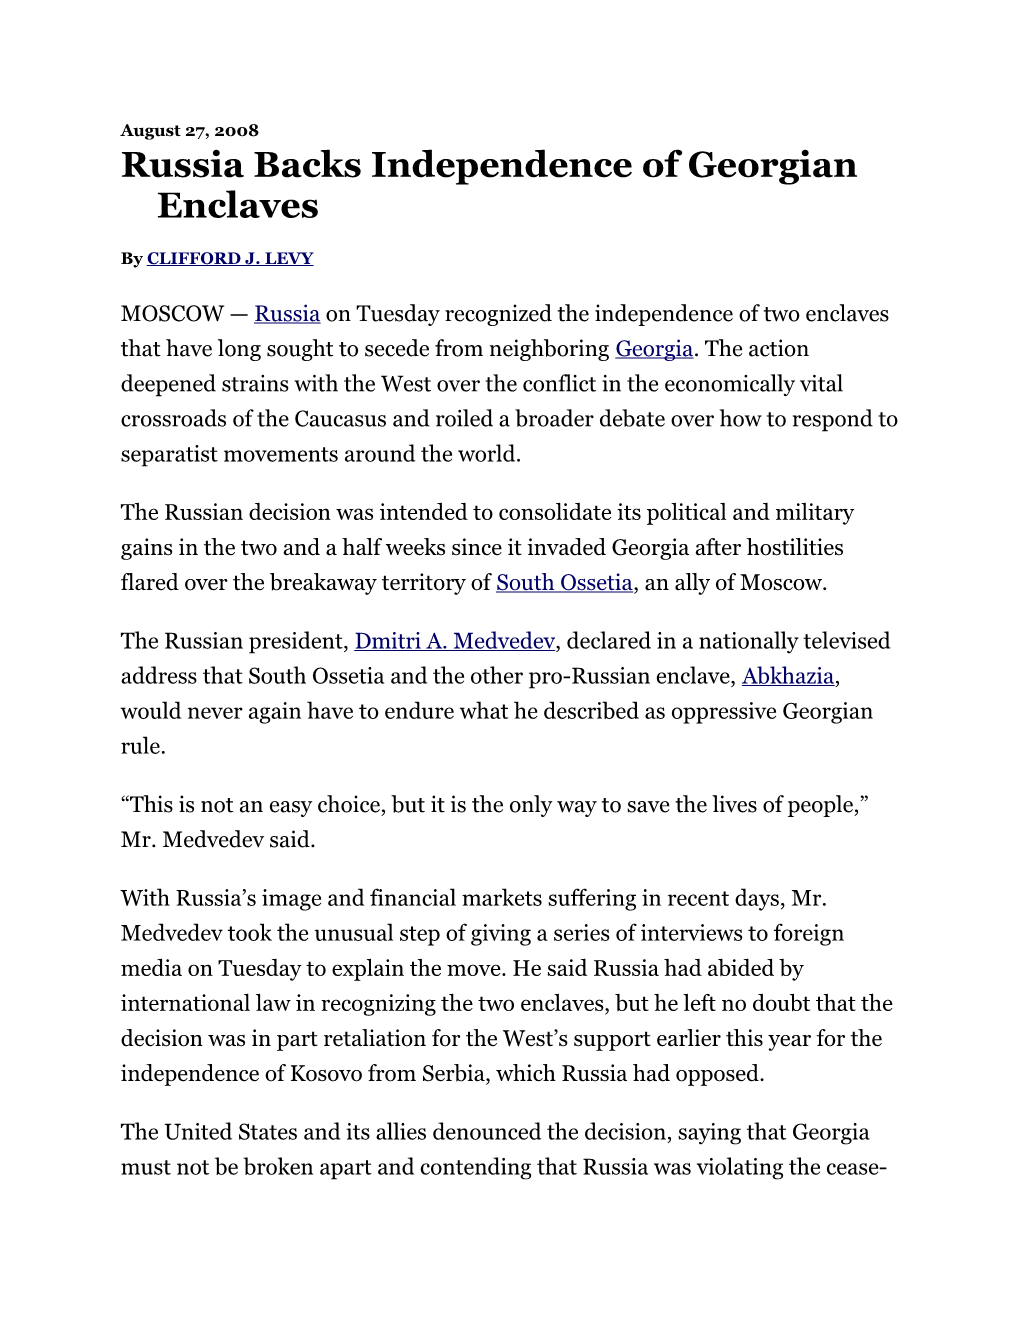 Russia Backs Independence of Georgian Enclaves